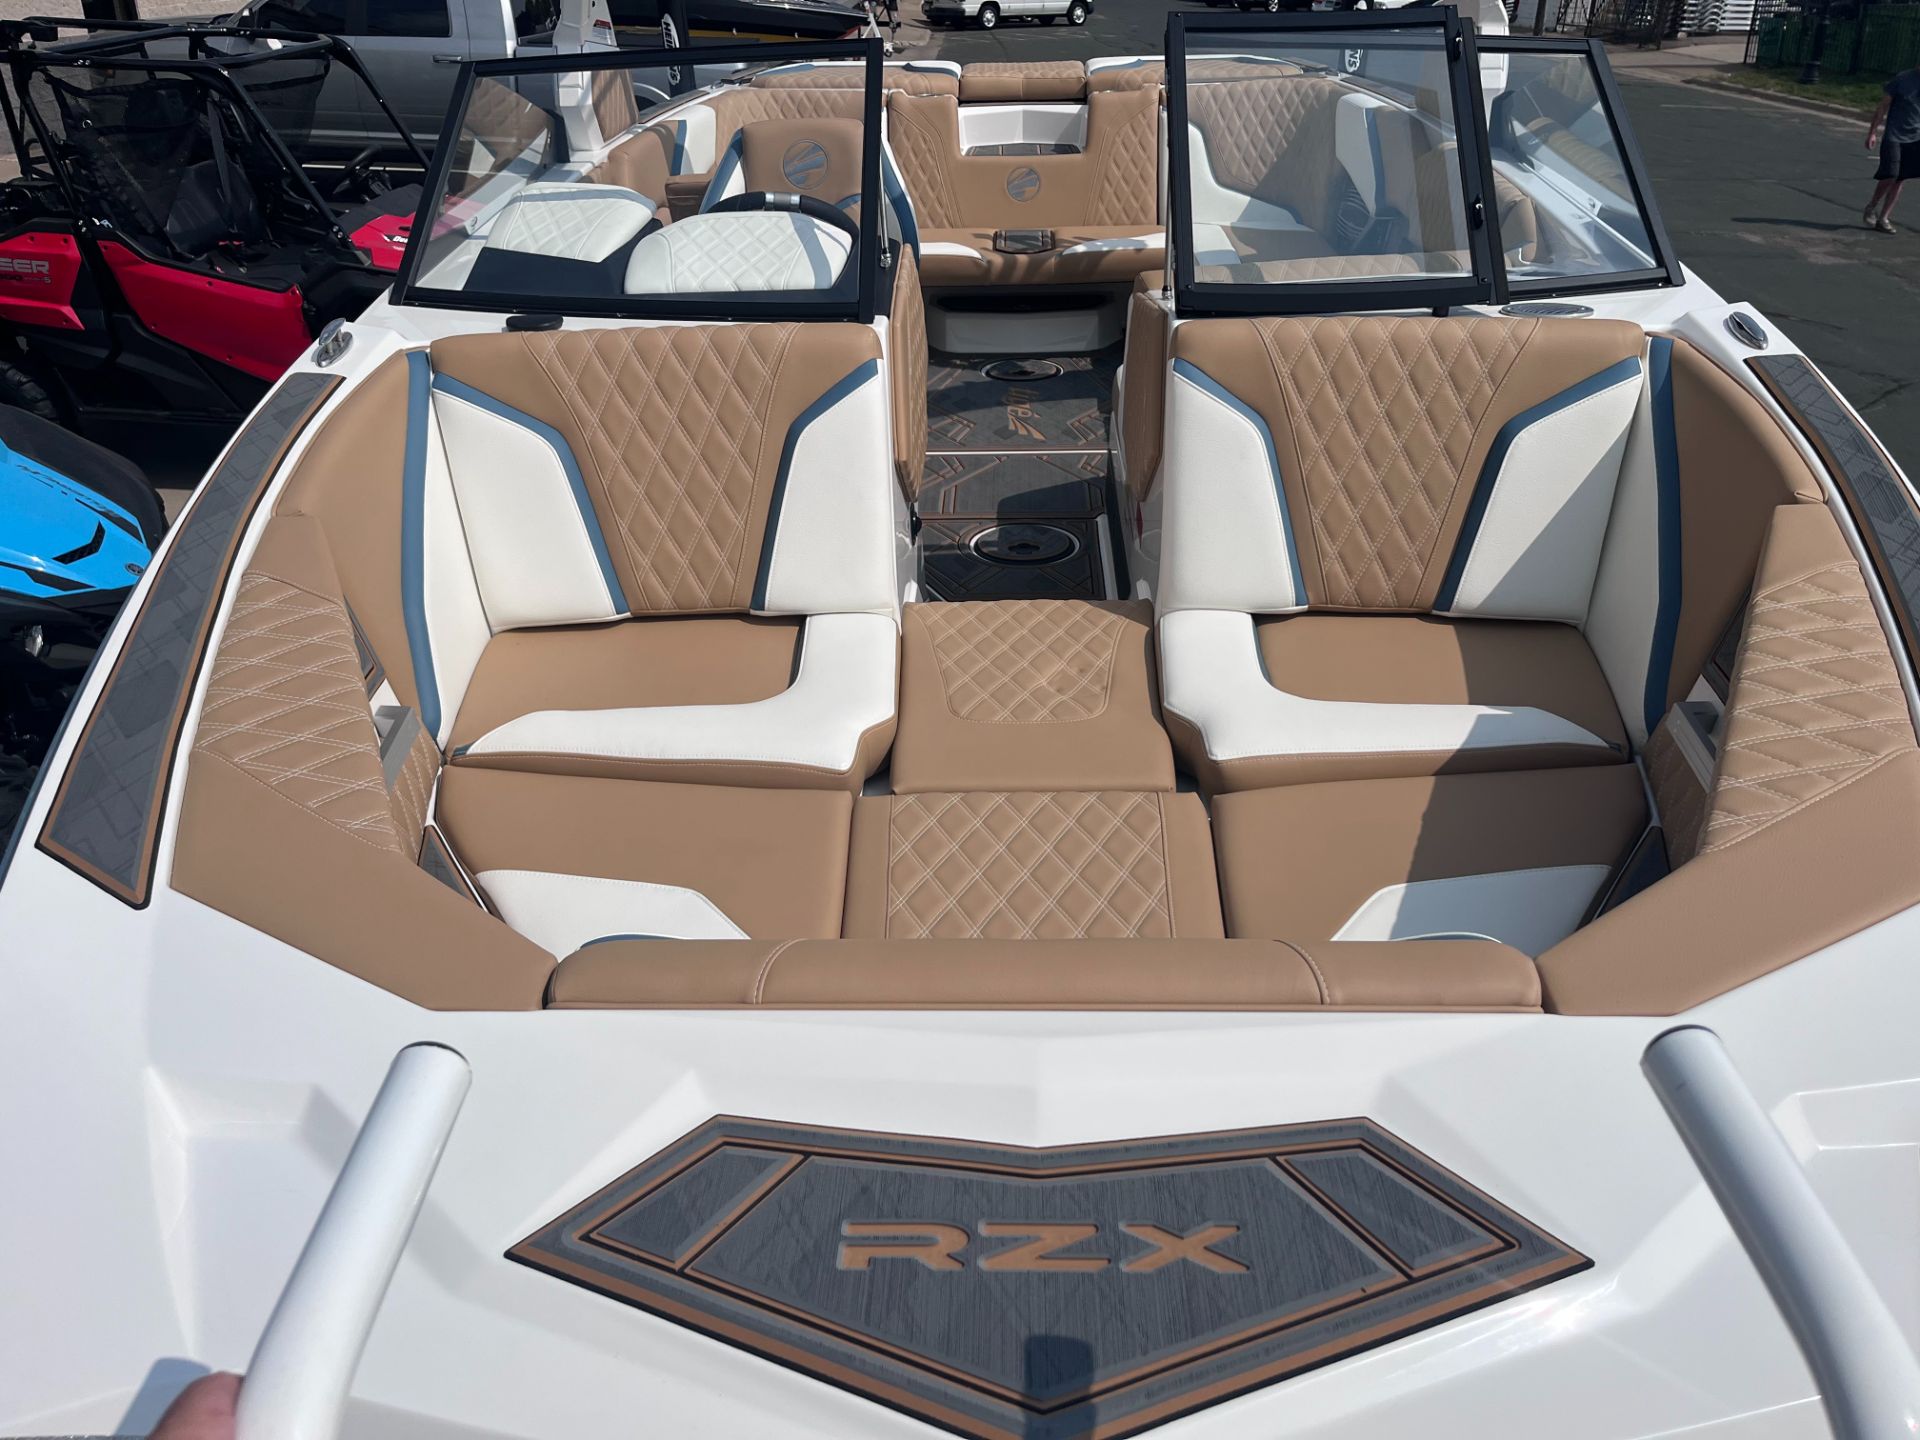 New 2024 TIGE 22 RZX Watercraft in Osseo MN 0244C All